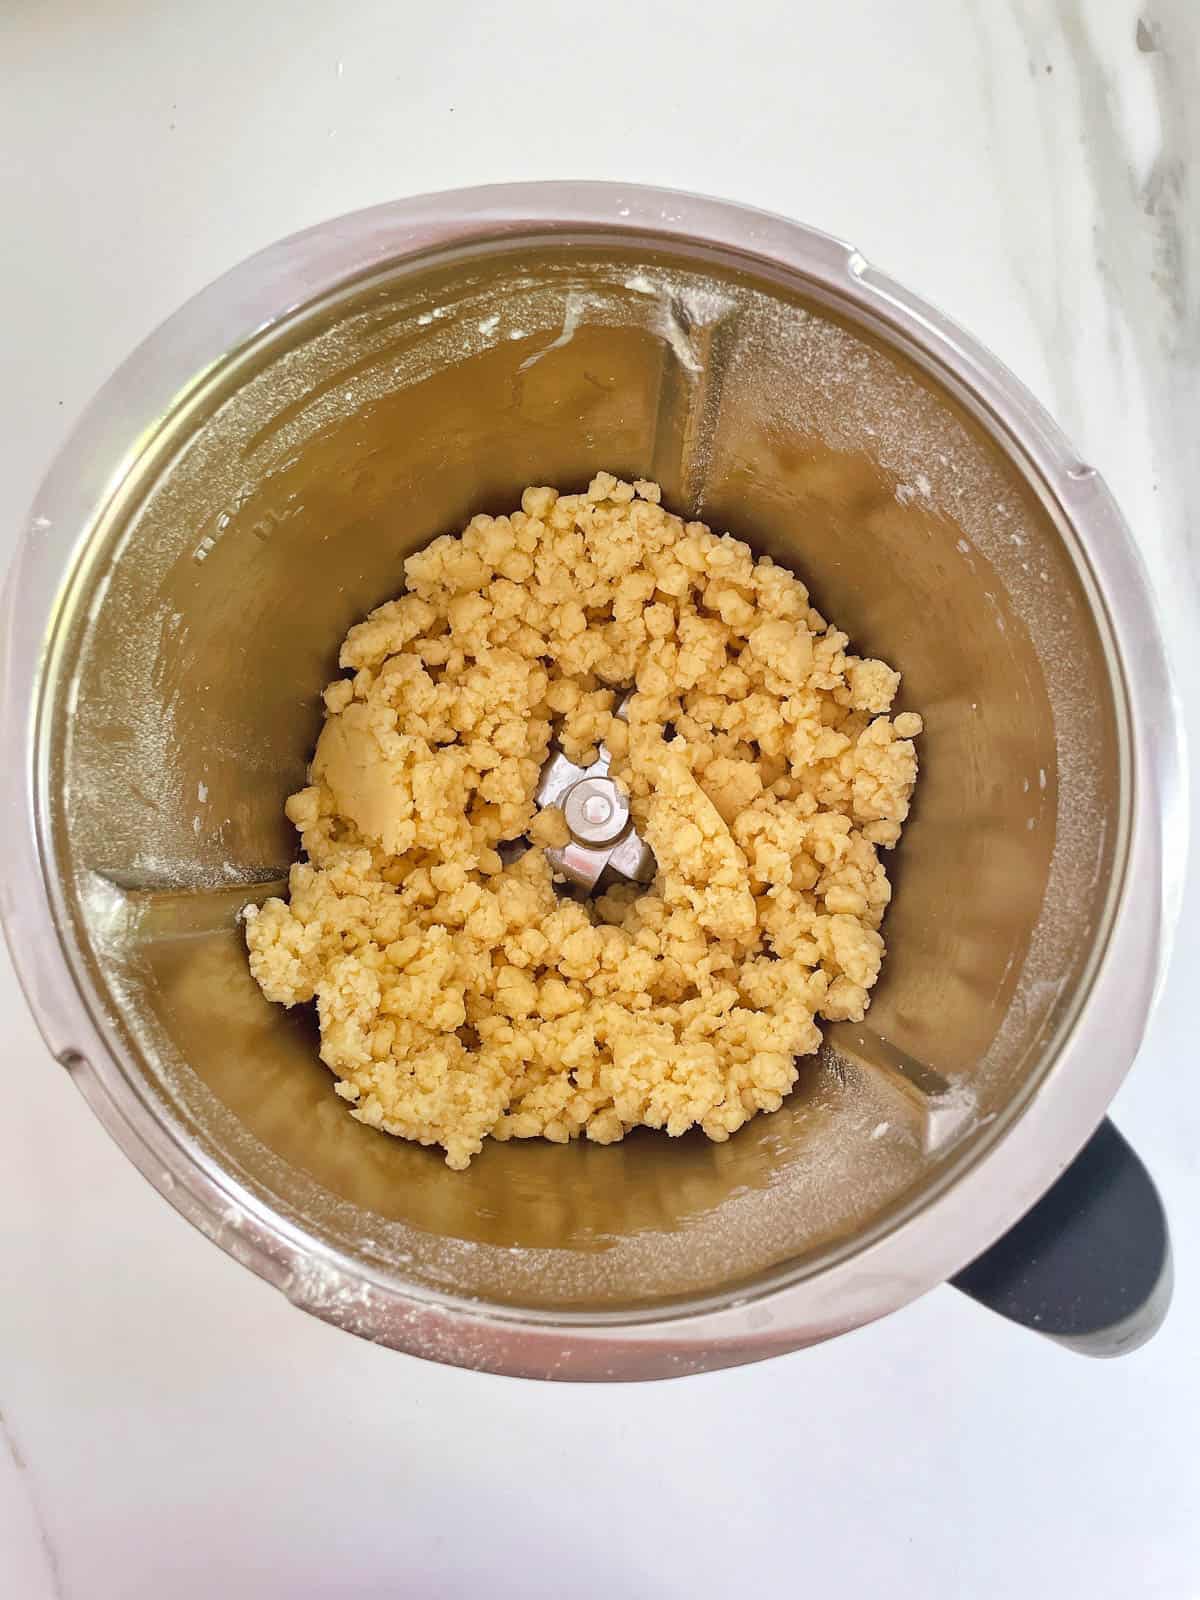 Shortbread crumbs in Thermomix bowl.